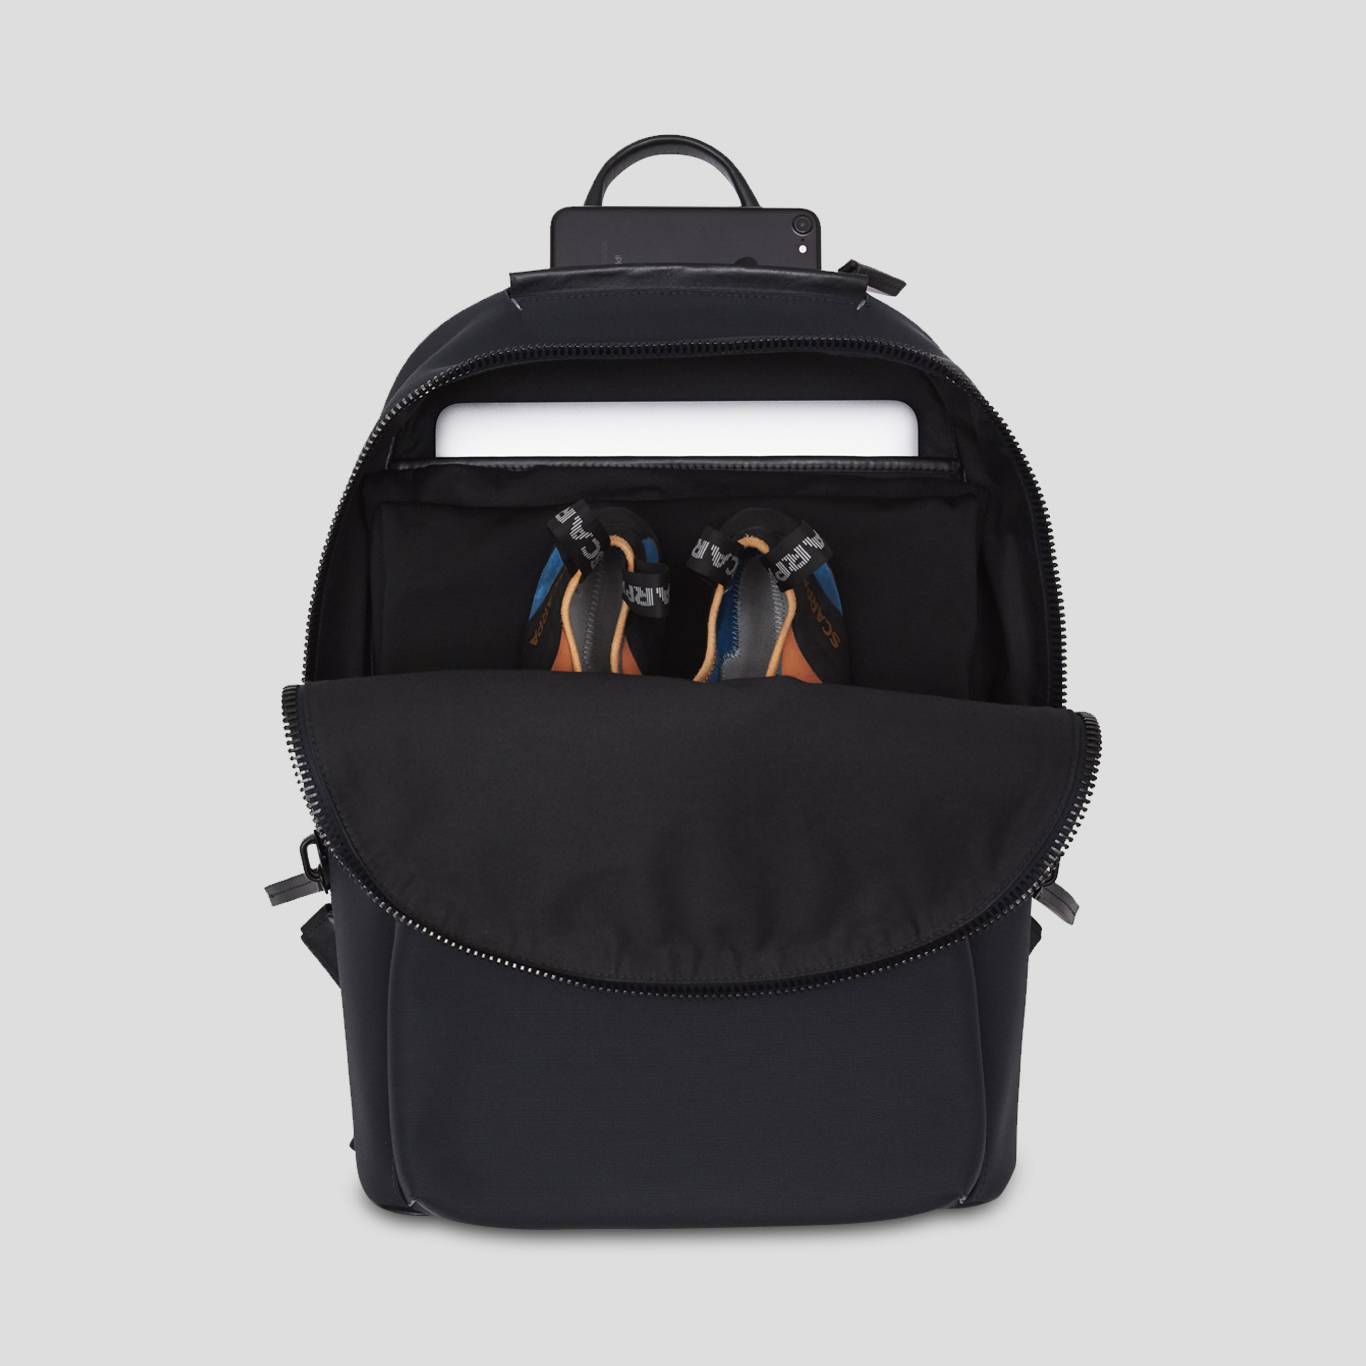 Slipstream rucksack with laptop pocket and climbing shoes